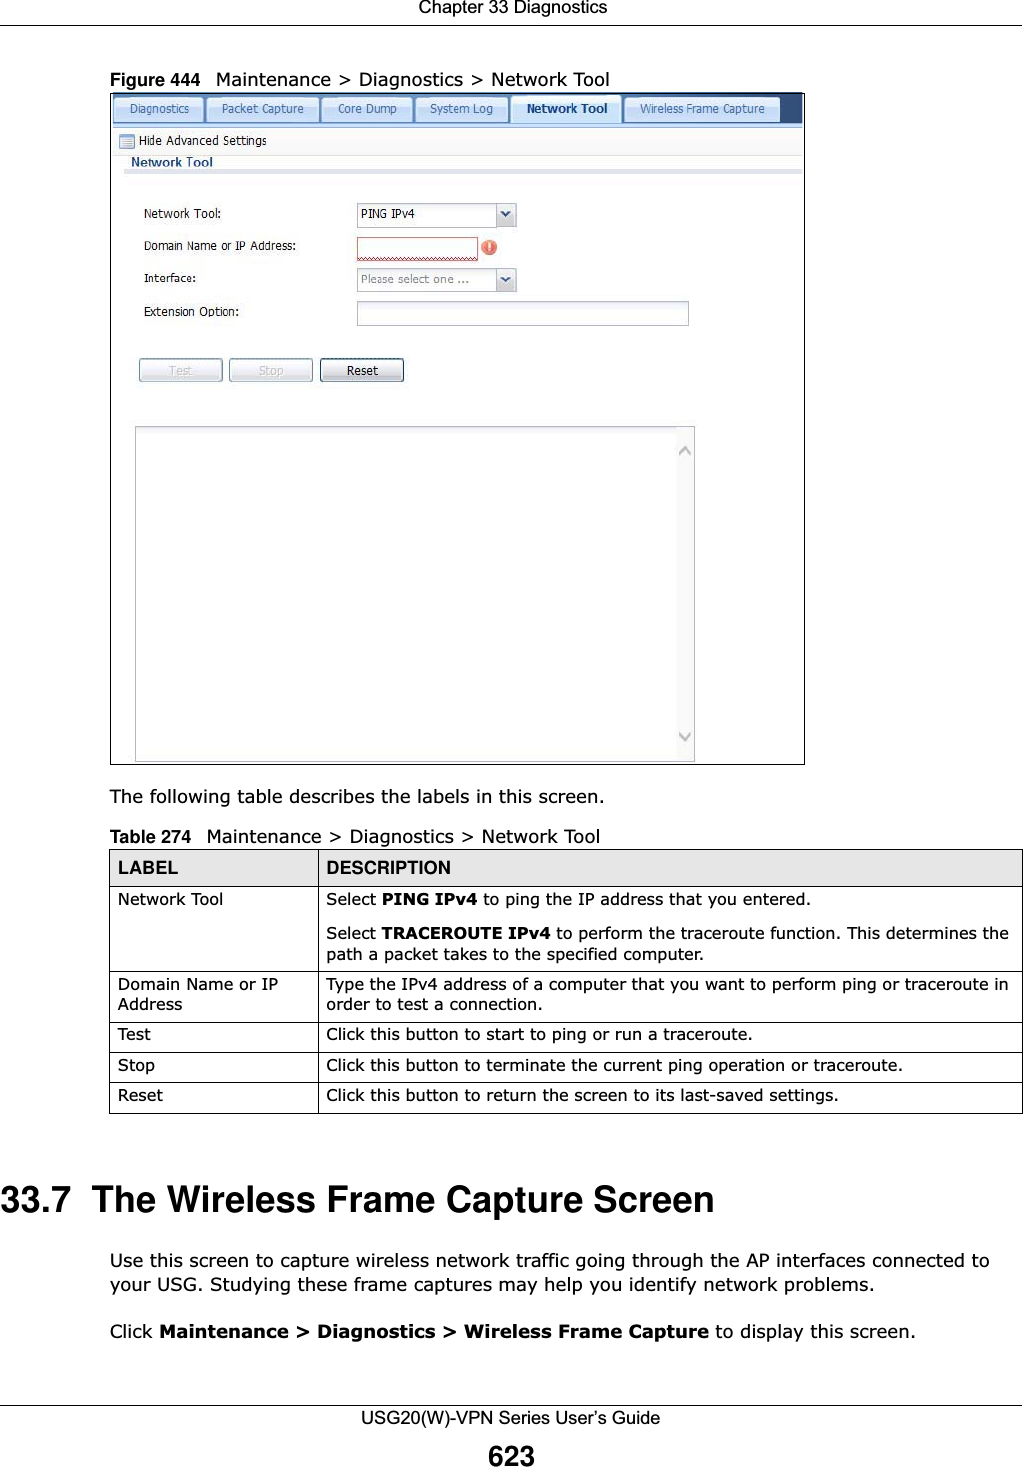  Chapter 33 DiagnosticsUSG20(W)-VPN Series User’s Guide623Figure 444   Maintenance &gt; Diagnostics &gt; Network Tool    The following table describes the labels in this screen.  33.7  The Wireless Frame Capture Screen Use this screen to capture wireless network traffic going through the AP interfaces connected to your USG. Studying these frame captures may help you identify network problems.Click Maintenance &gt; Diagnostics &gt; Wireless Frame Capture to display this screen. Table 274   Maintenance &gt; Diagnostics &gt; Network ToolLABEL DESCRIPTIONNetwork Tool Select PING IPv4 to ping the IP address that you entered.Select TRACEROUTE IPv4 to perform the traceroute function. This determines the path a packet takes to the specified computer.Domain Name or IP AddressType the IPv4 address of a computer that you want to perform ping or traceroute in order to test a connection.Test Click this button to start to ping or run a traceroute.Stop Click this button to terminate the current ping operation or traceroute.Reset Click this button to return the screen to its last-saved settings. 